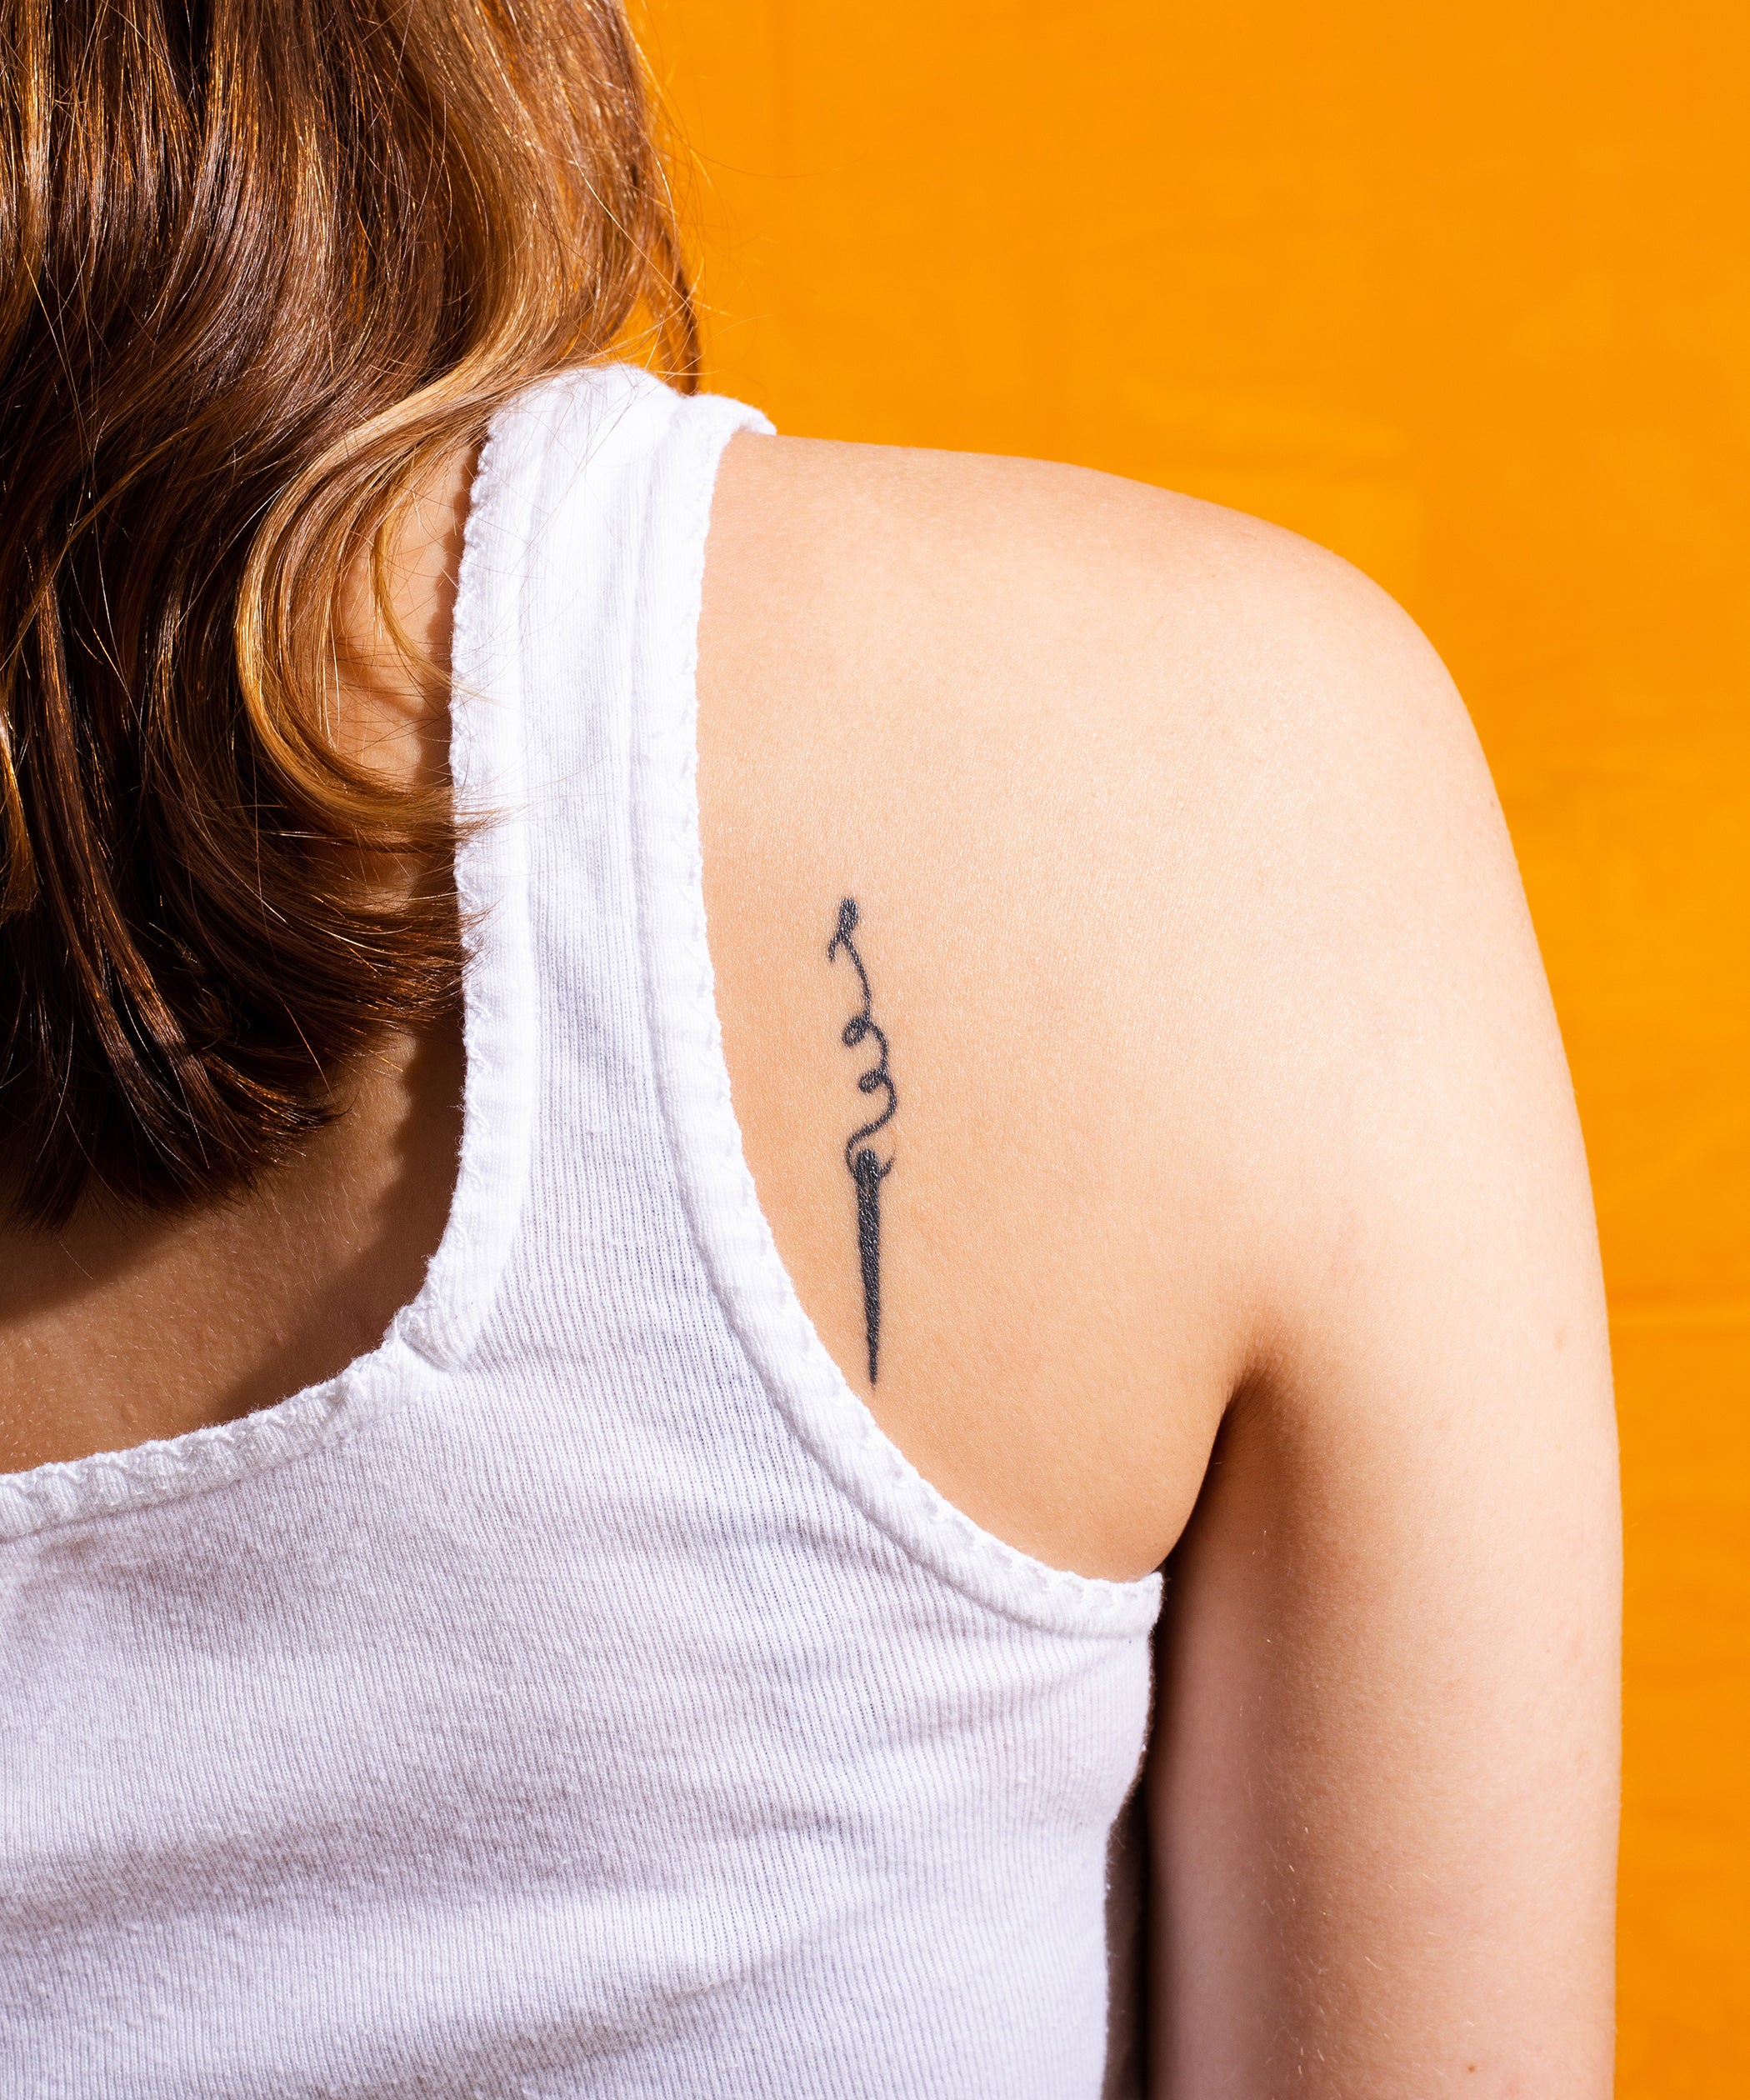 Tattoo therapy How ink helps sexual assault survivors heal  CNN